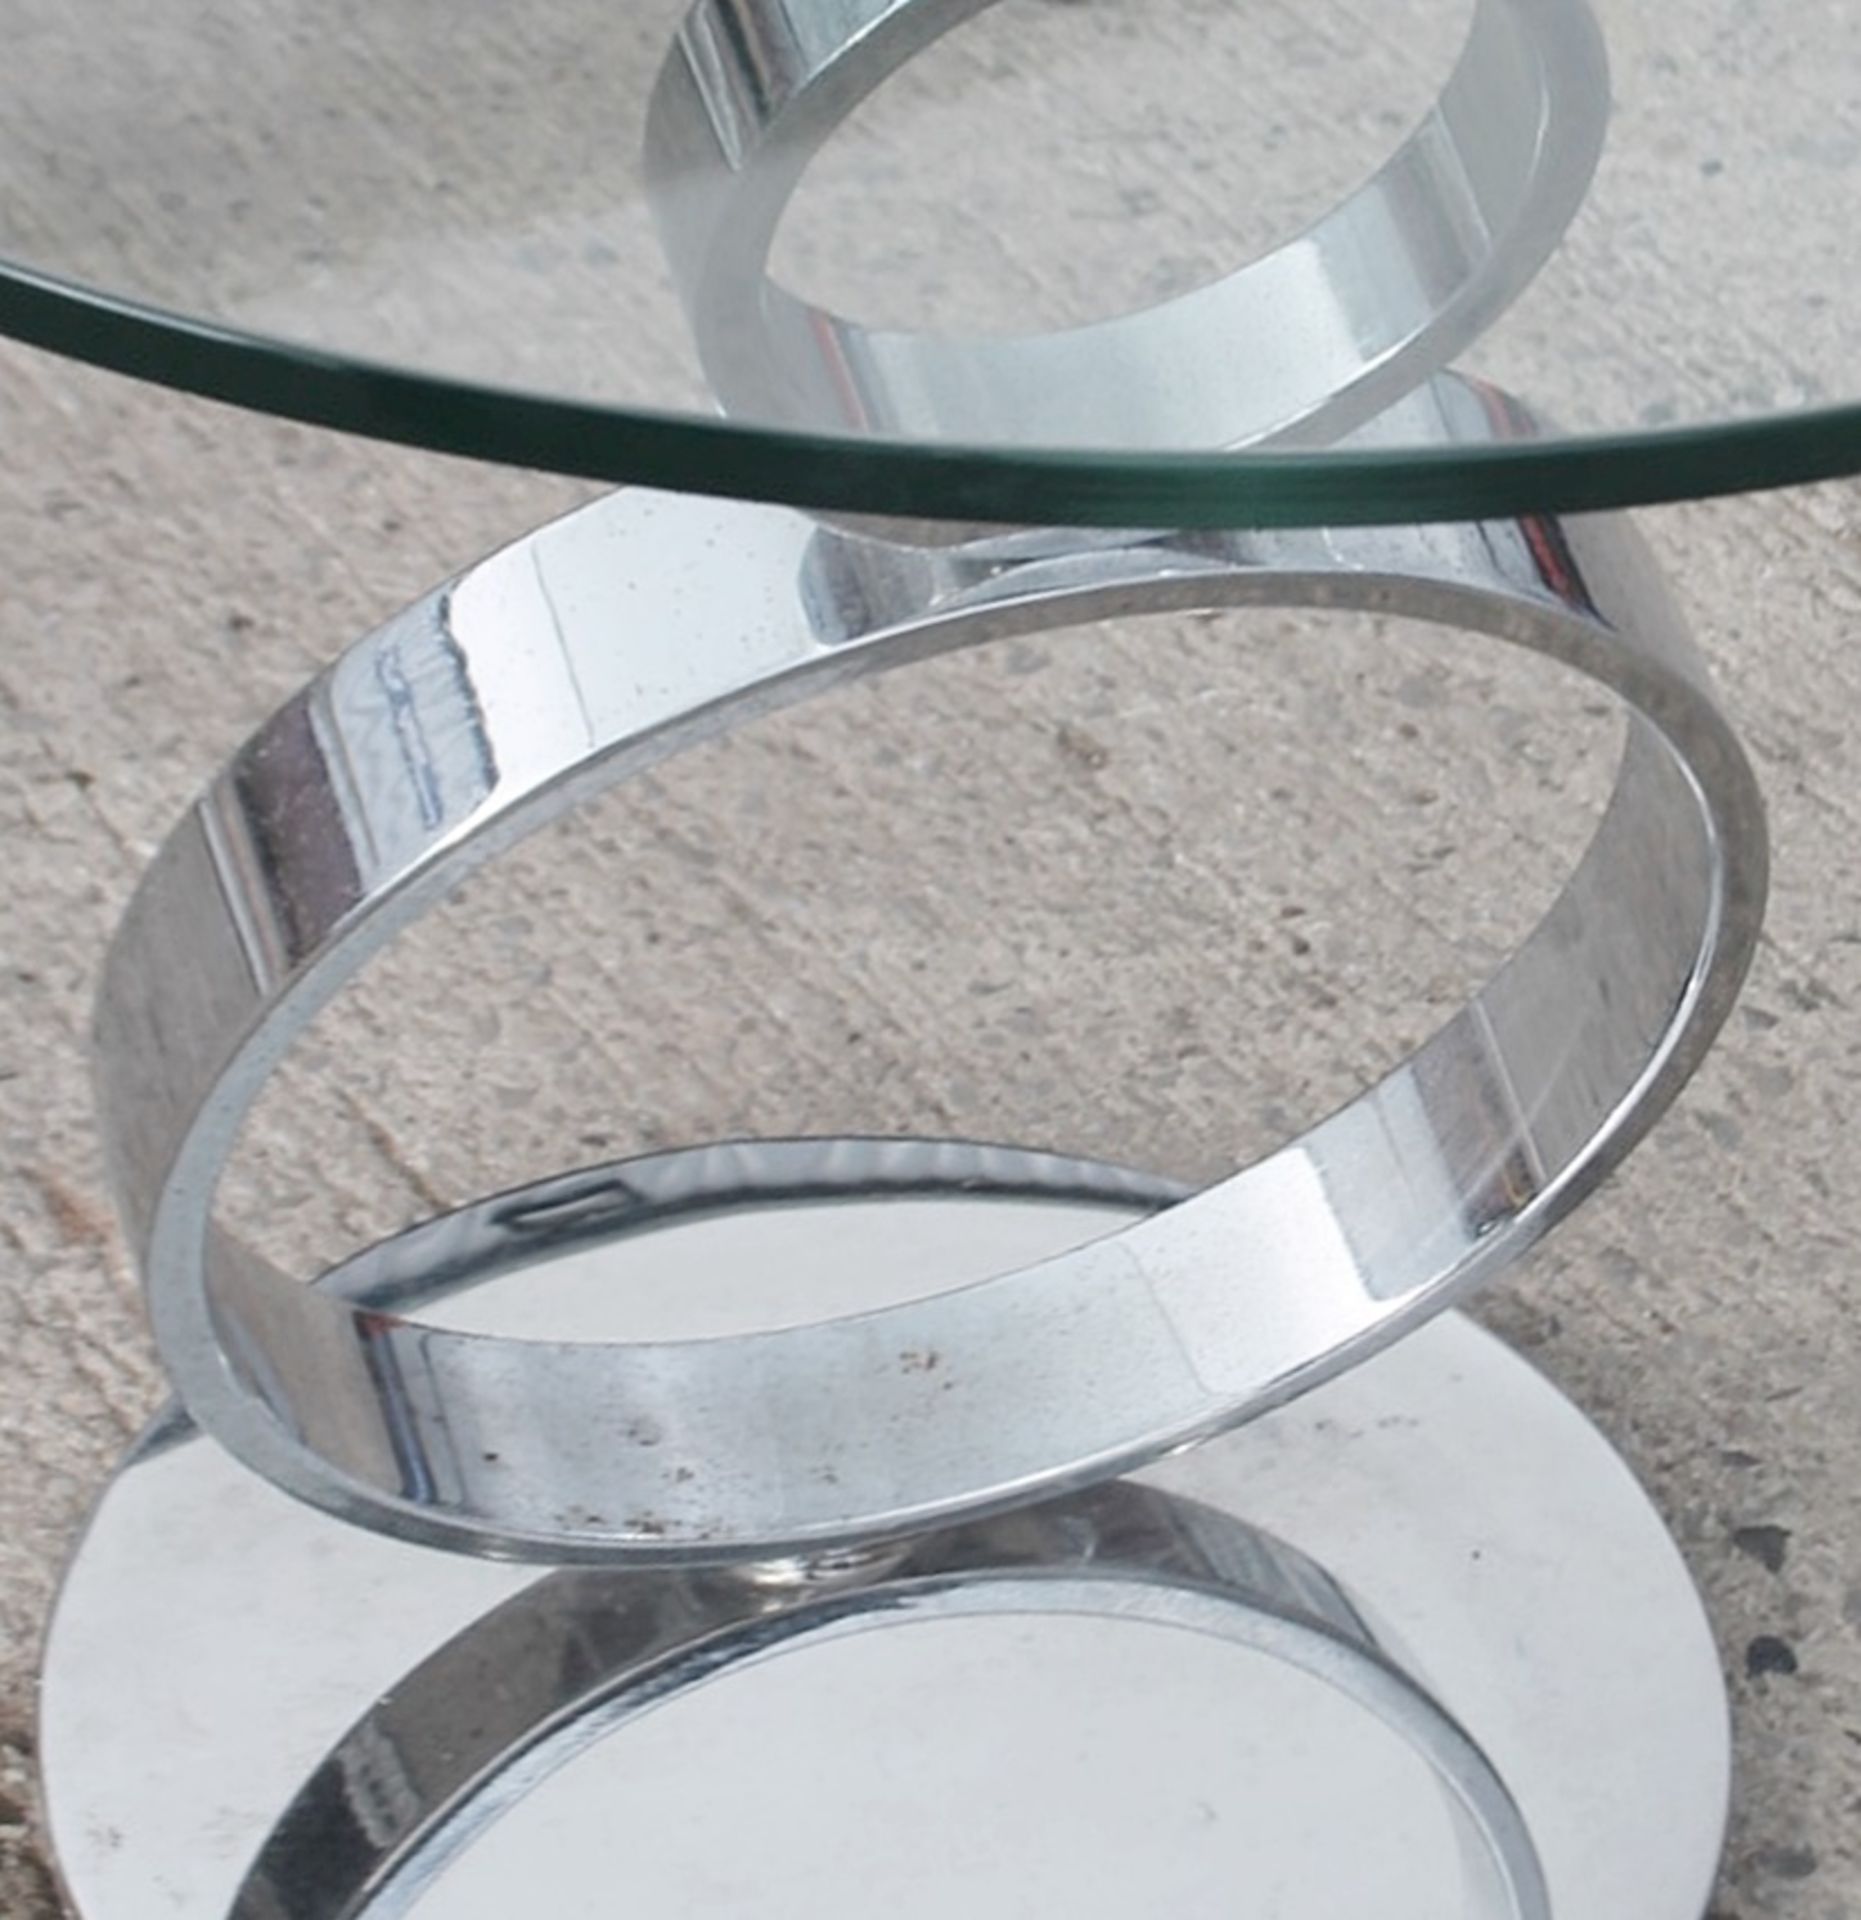 1 x Small Circular Glass / Chrome Table With A Slanted Base - Recently Relocated From An Exclusive - Image 3 of 5